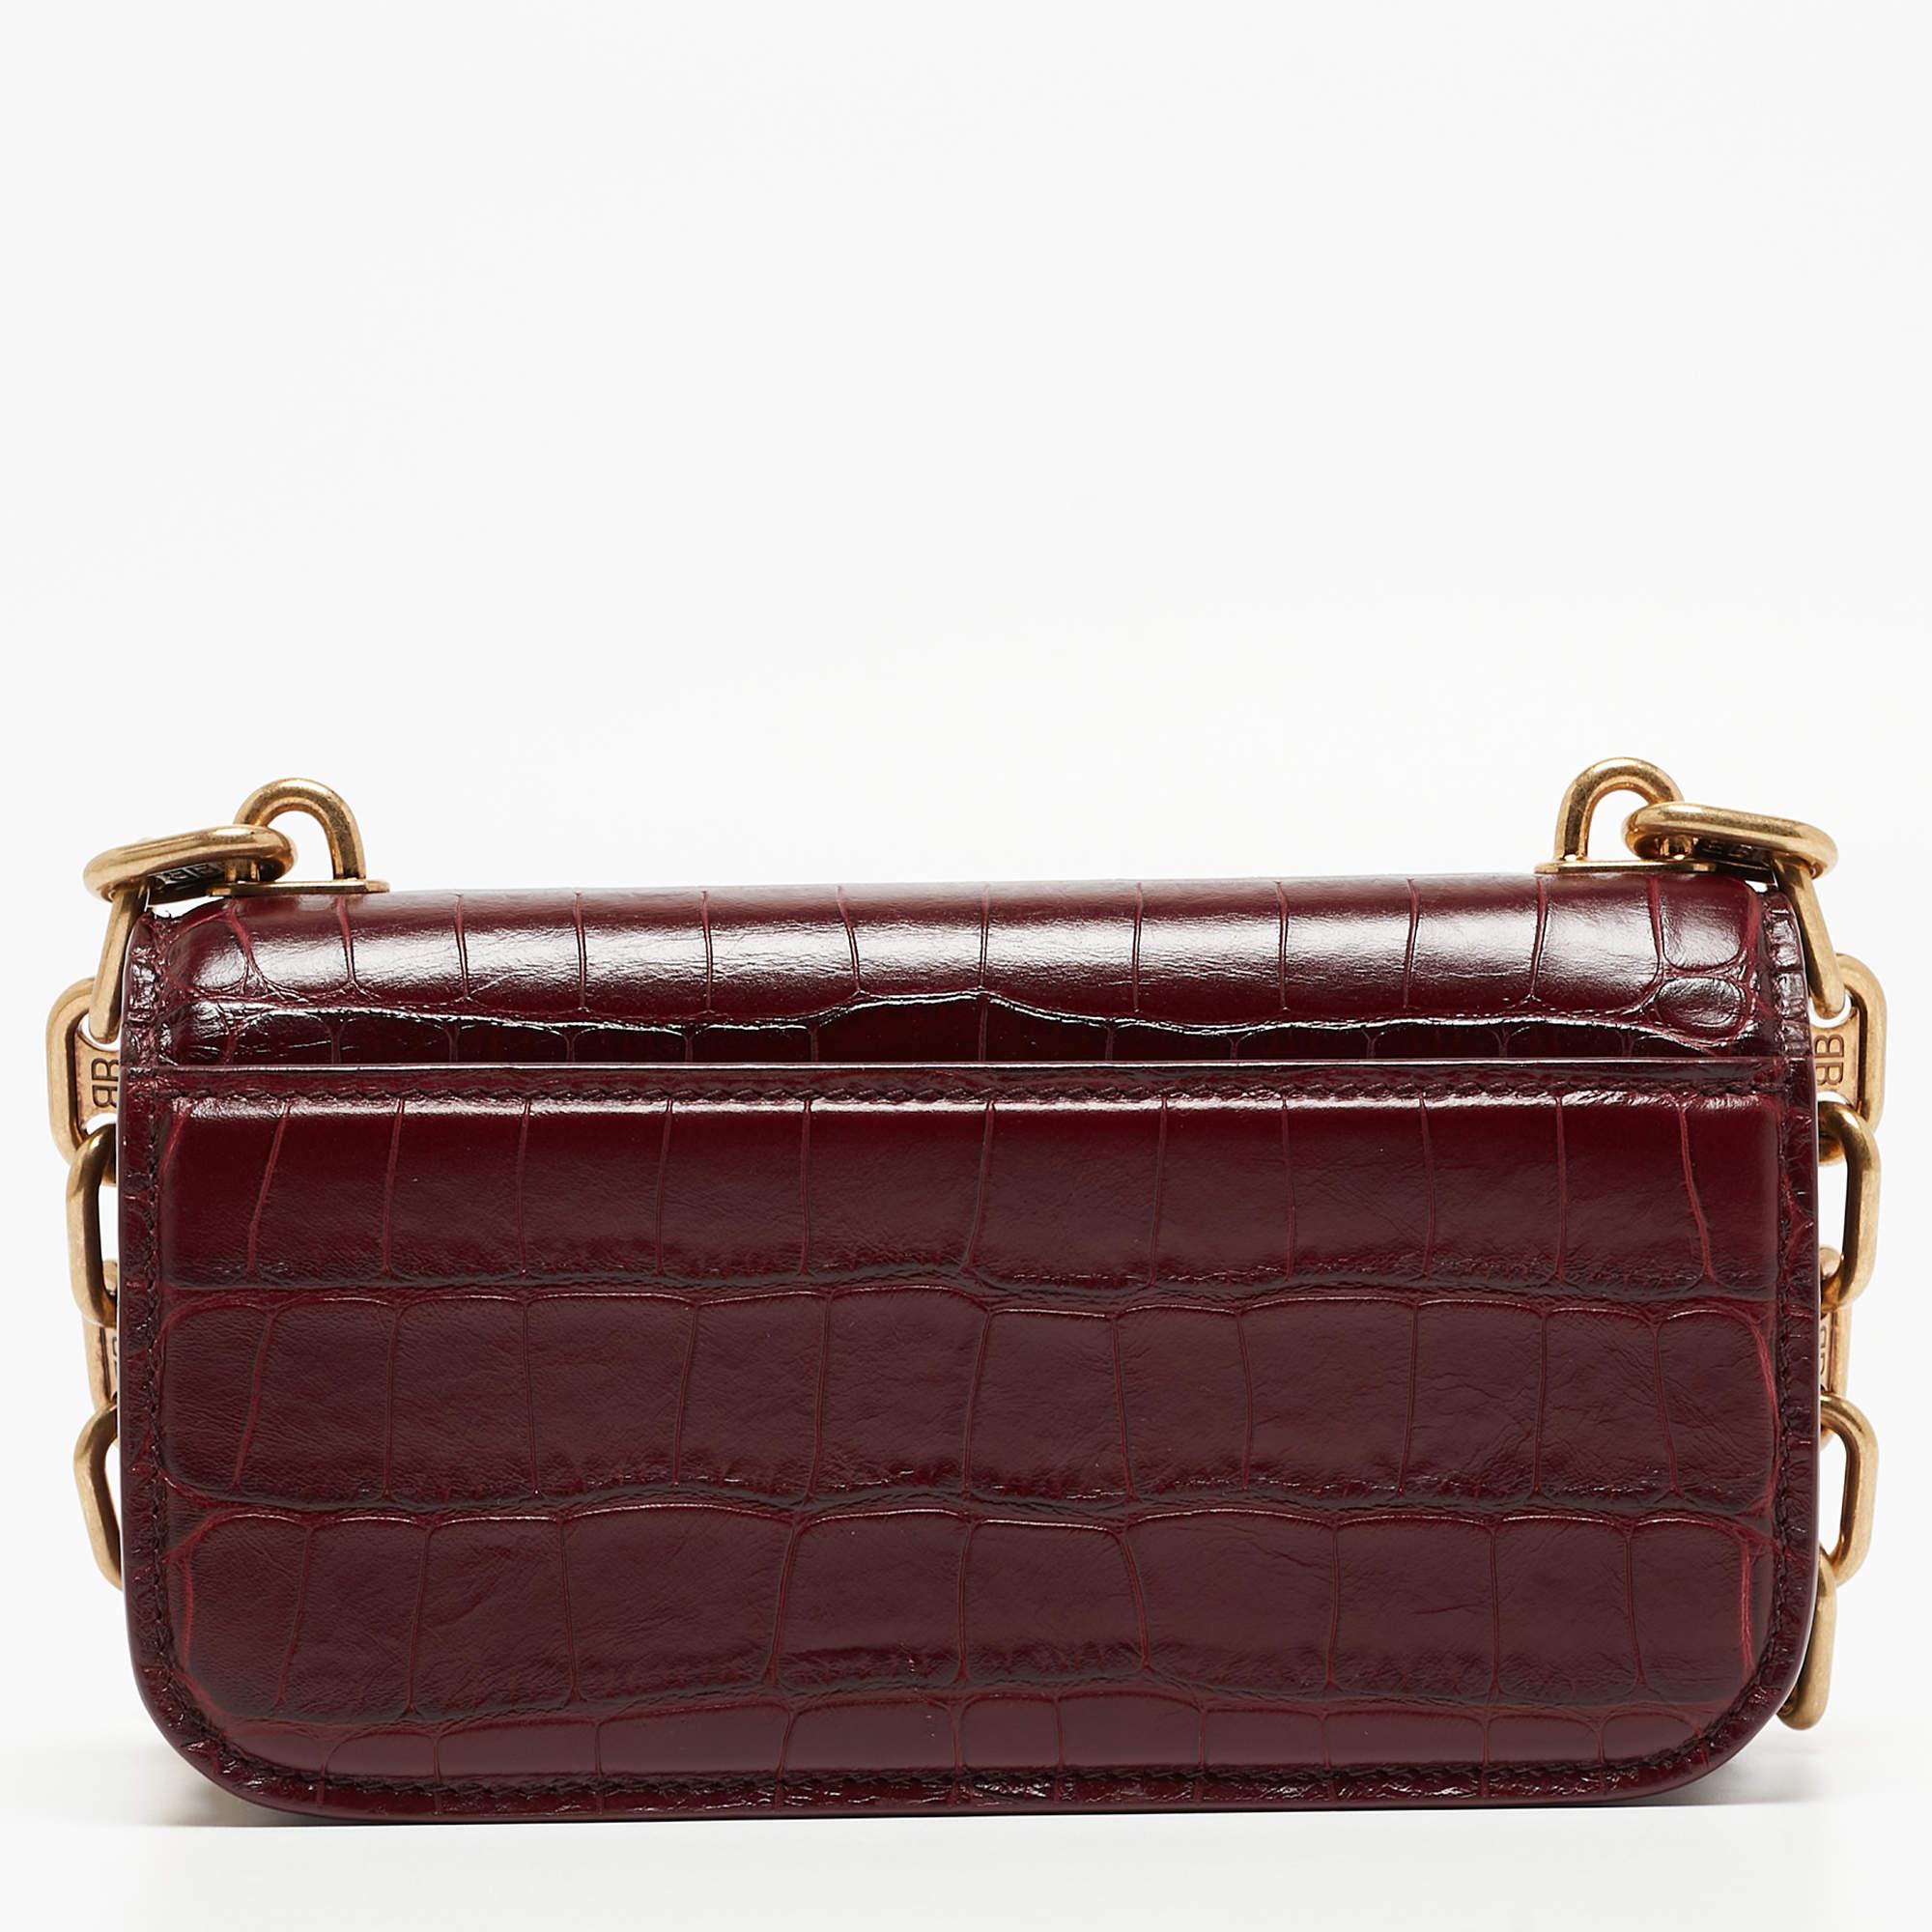 This Balenciaga burgundy bag for women is an example of the brand's fine designs that are skillfully crafted to project a classic charm. It is a functional creation with an elevating appeal.

Includes: Original Dustbag, Price Tag